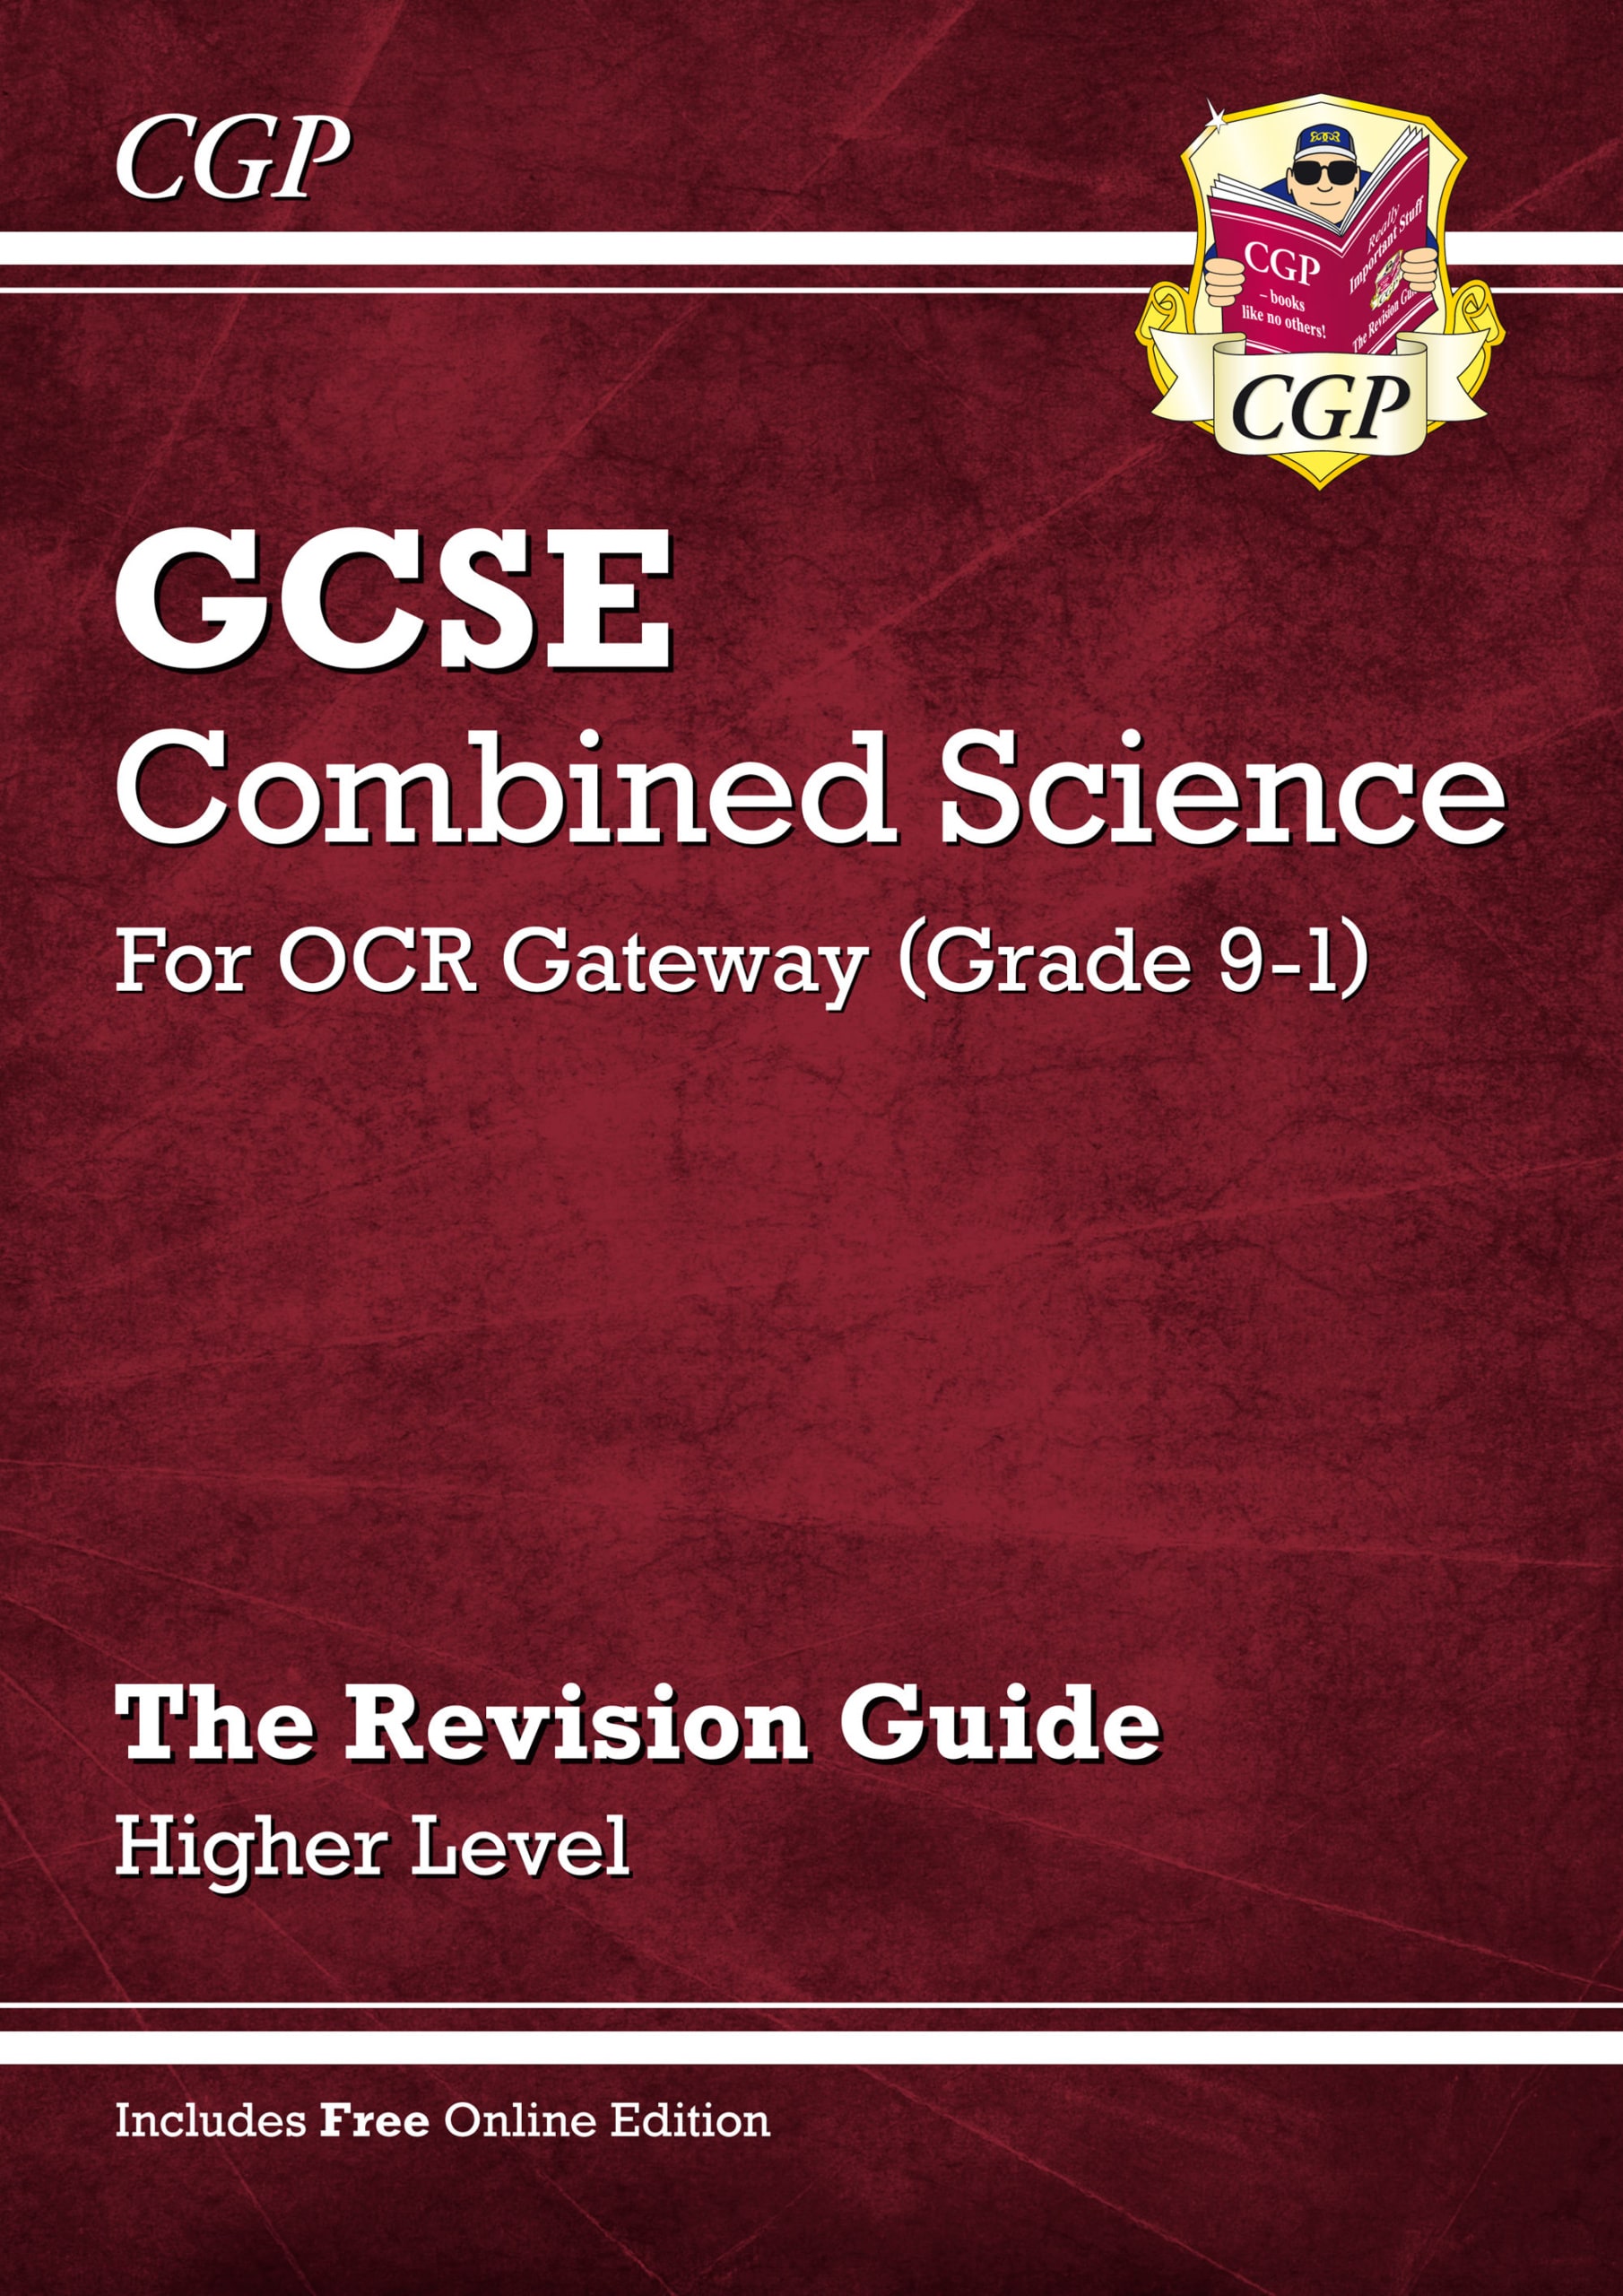 CGP GCSE Combined Science For OCR Gateway Higher Level Revision Guide